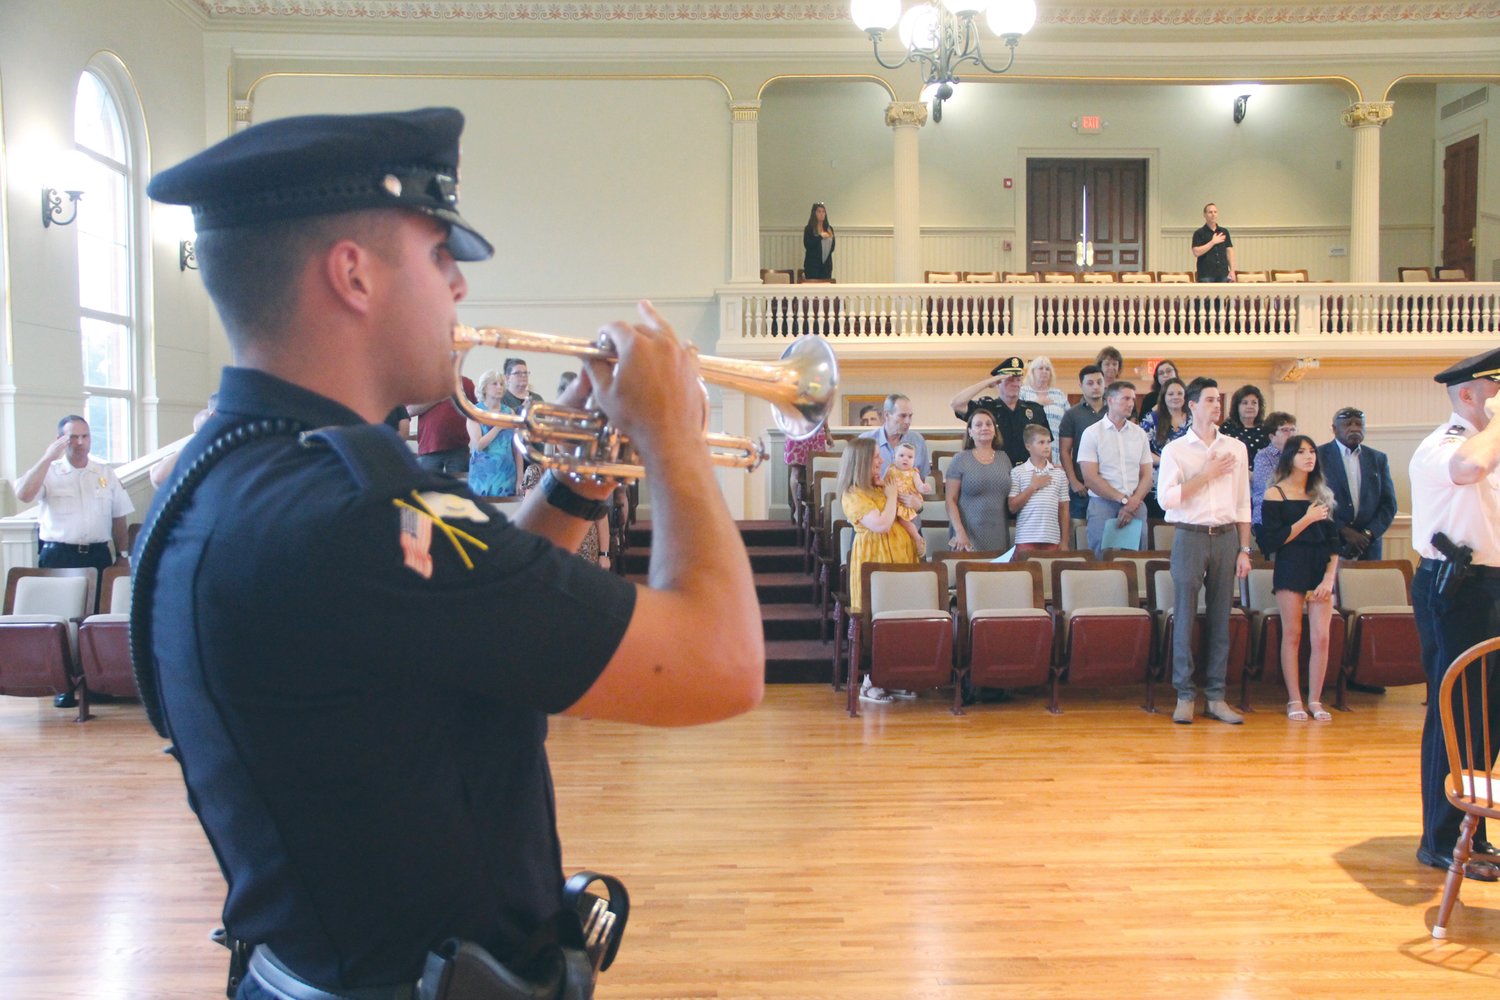 OPENING CEREMONY: Officer Oliver M. Pinheiro plays the National Anthem to open the police promotional/pinning ceremony held Aug. 10 at City Hall.